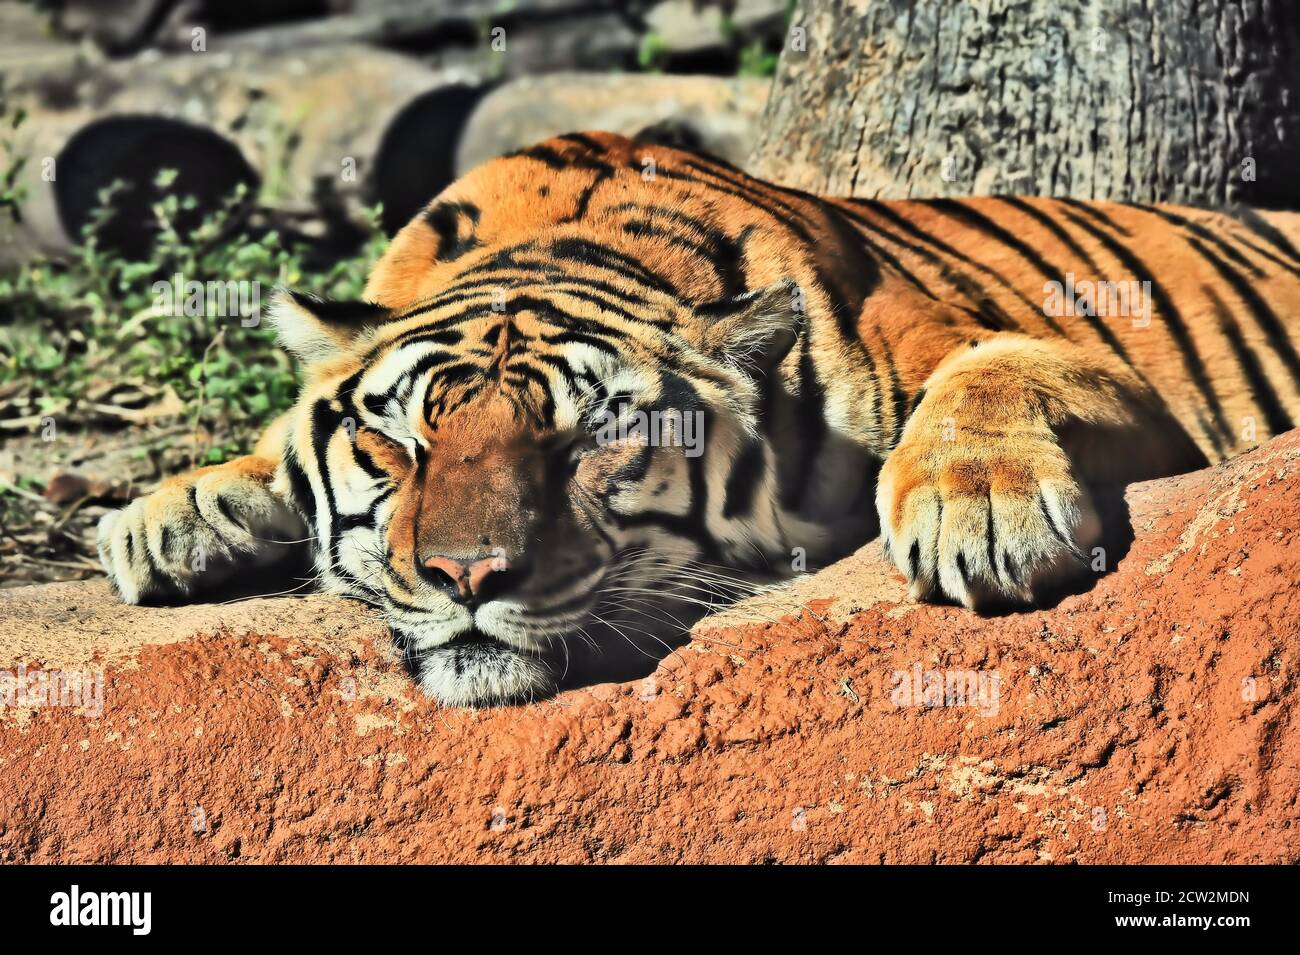 enzo the tiger sleeping clipart